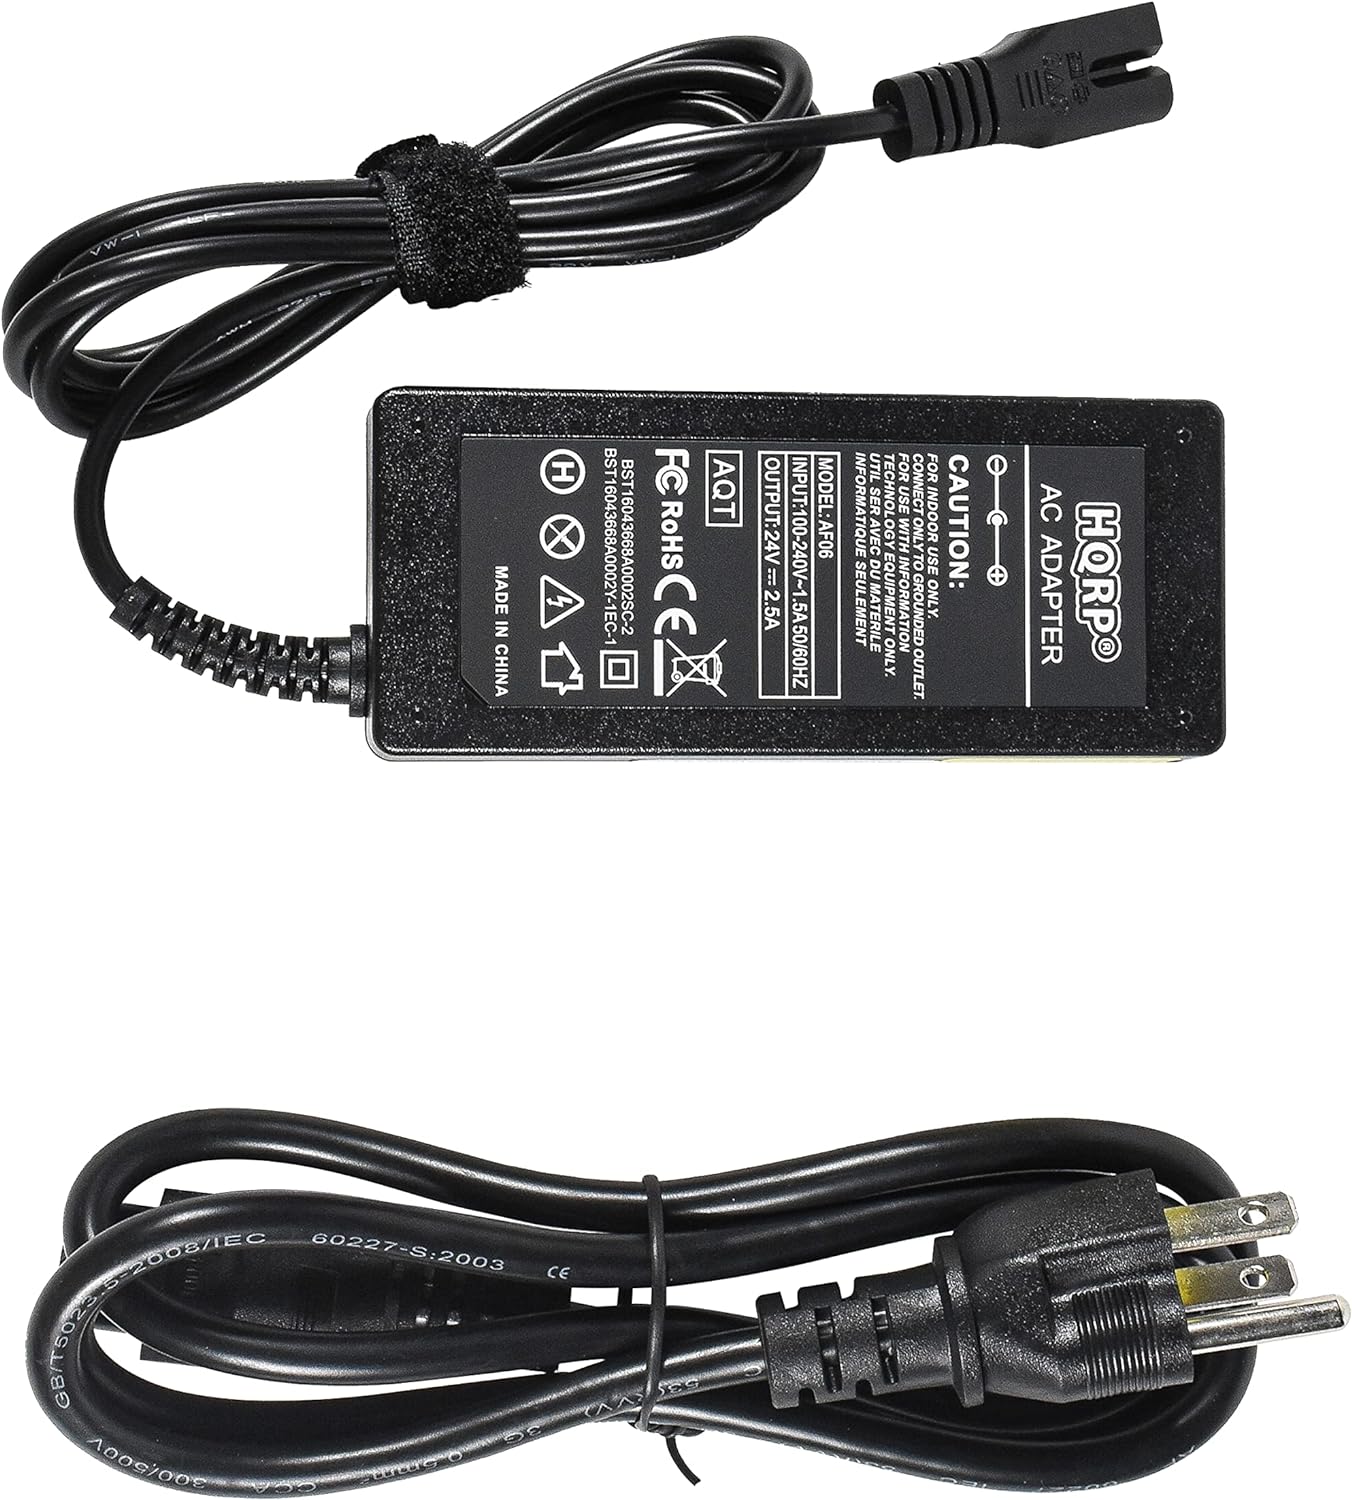 AC Adapter Compatible with UComfy Innov 8072 8954 4A201201 Innov IVP2400-2500 Foot Massager Emson Power Supply Cord Adap - Click Image to Close